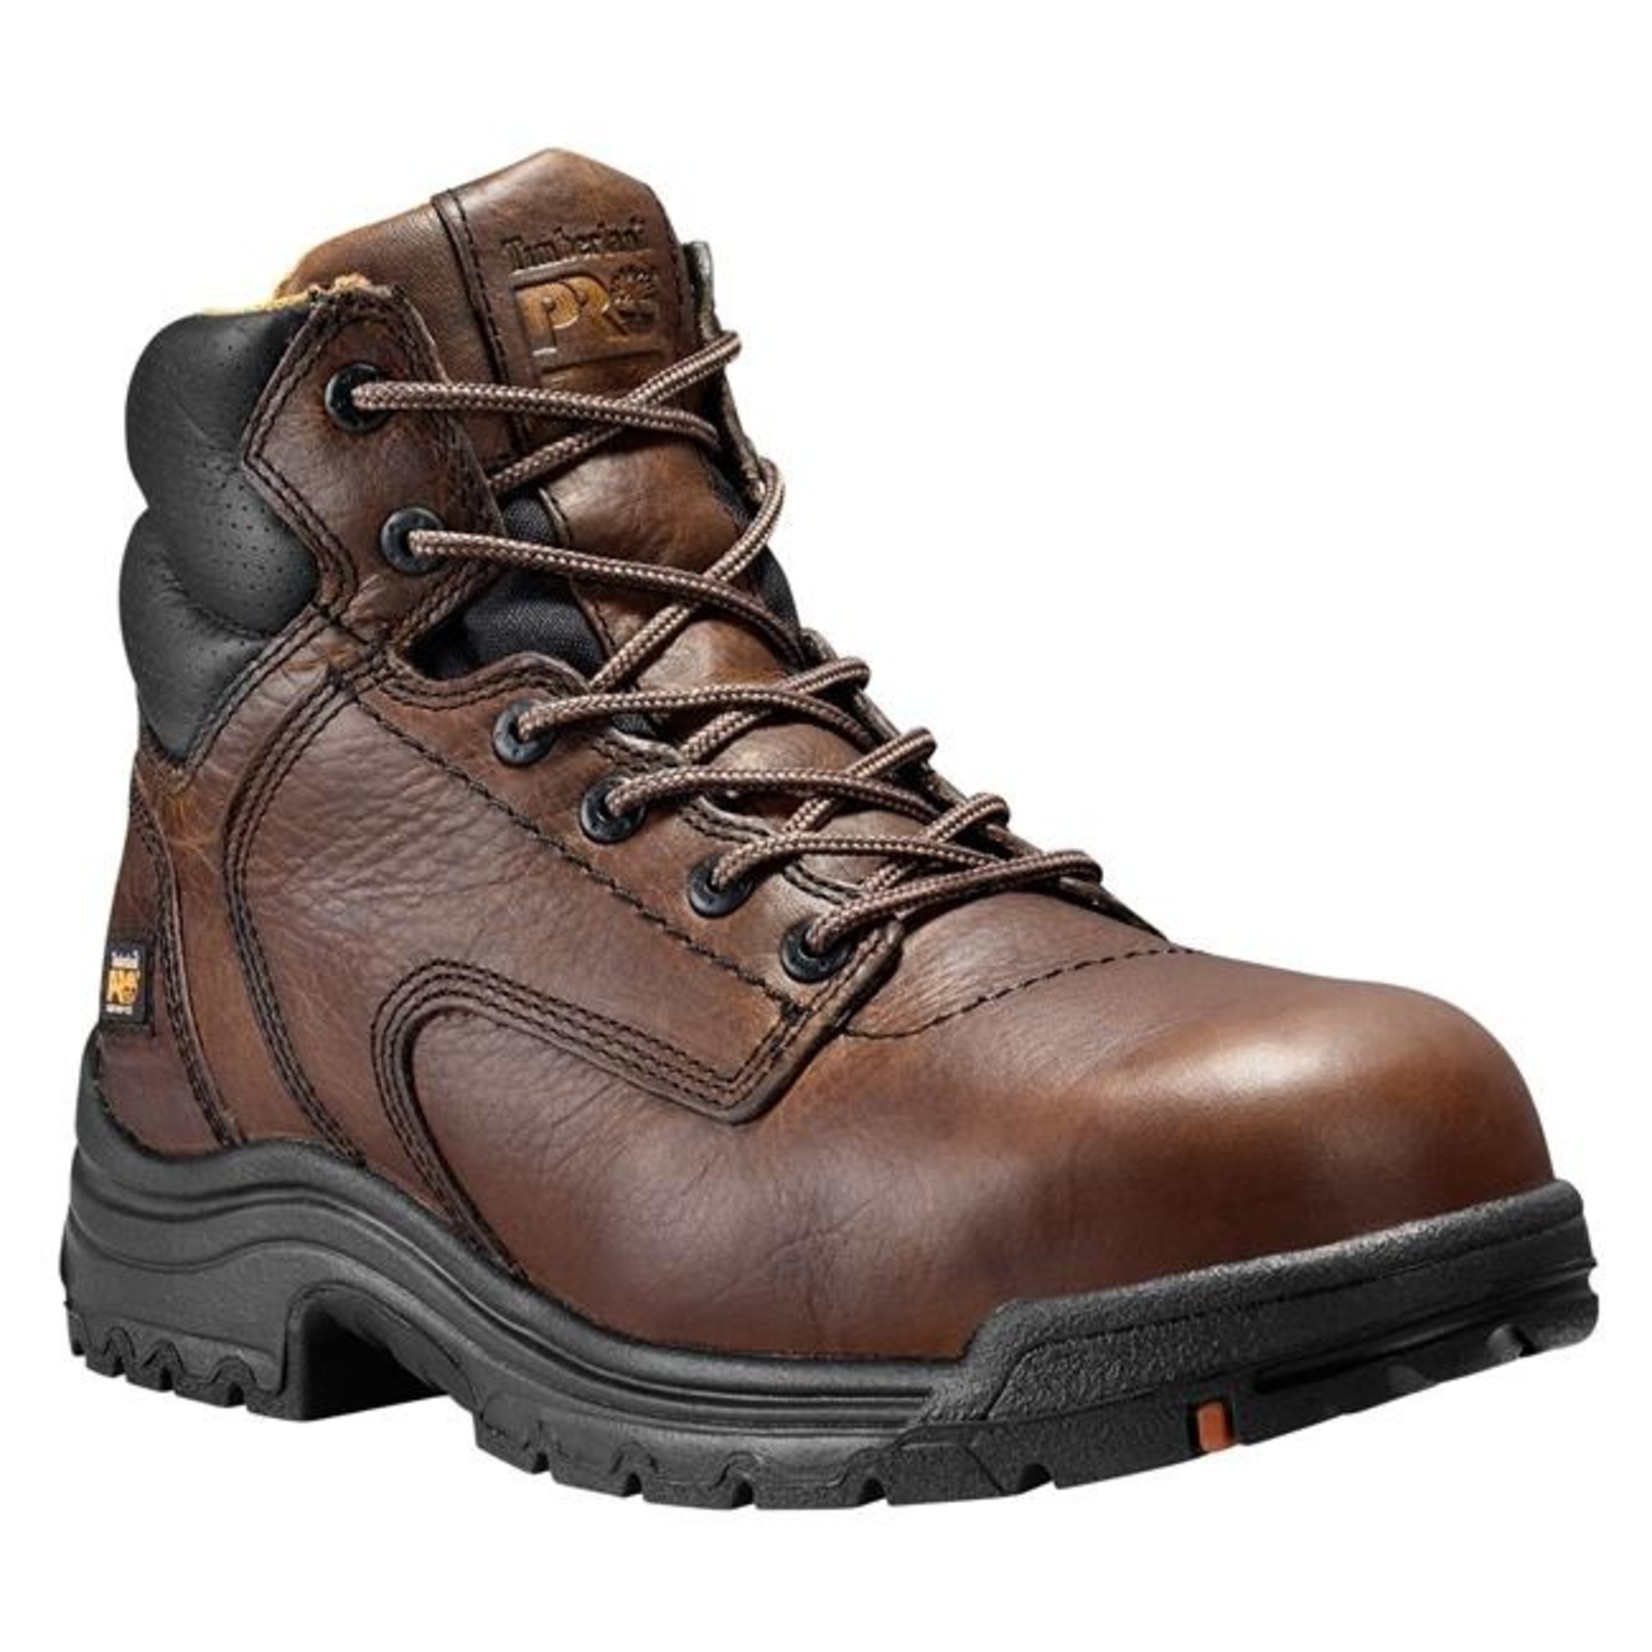 Timberland Timberland Pro 26063 Titan 6” Men’s Composite Toe Safety Boots